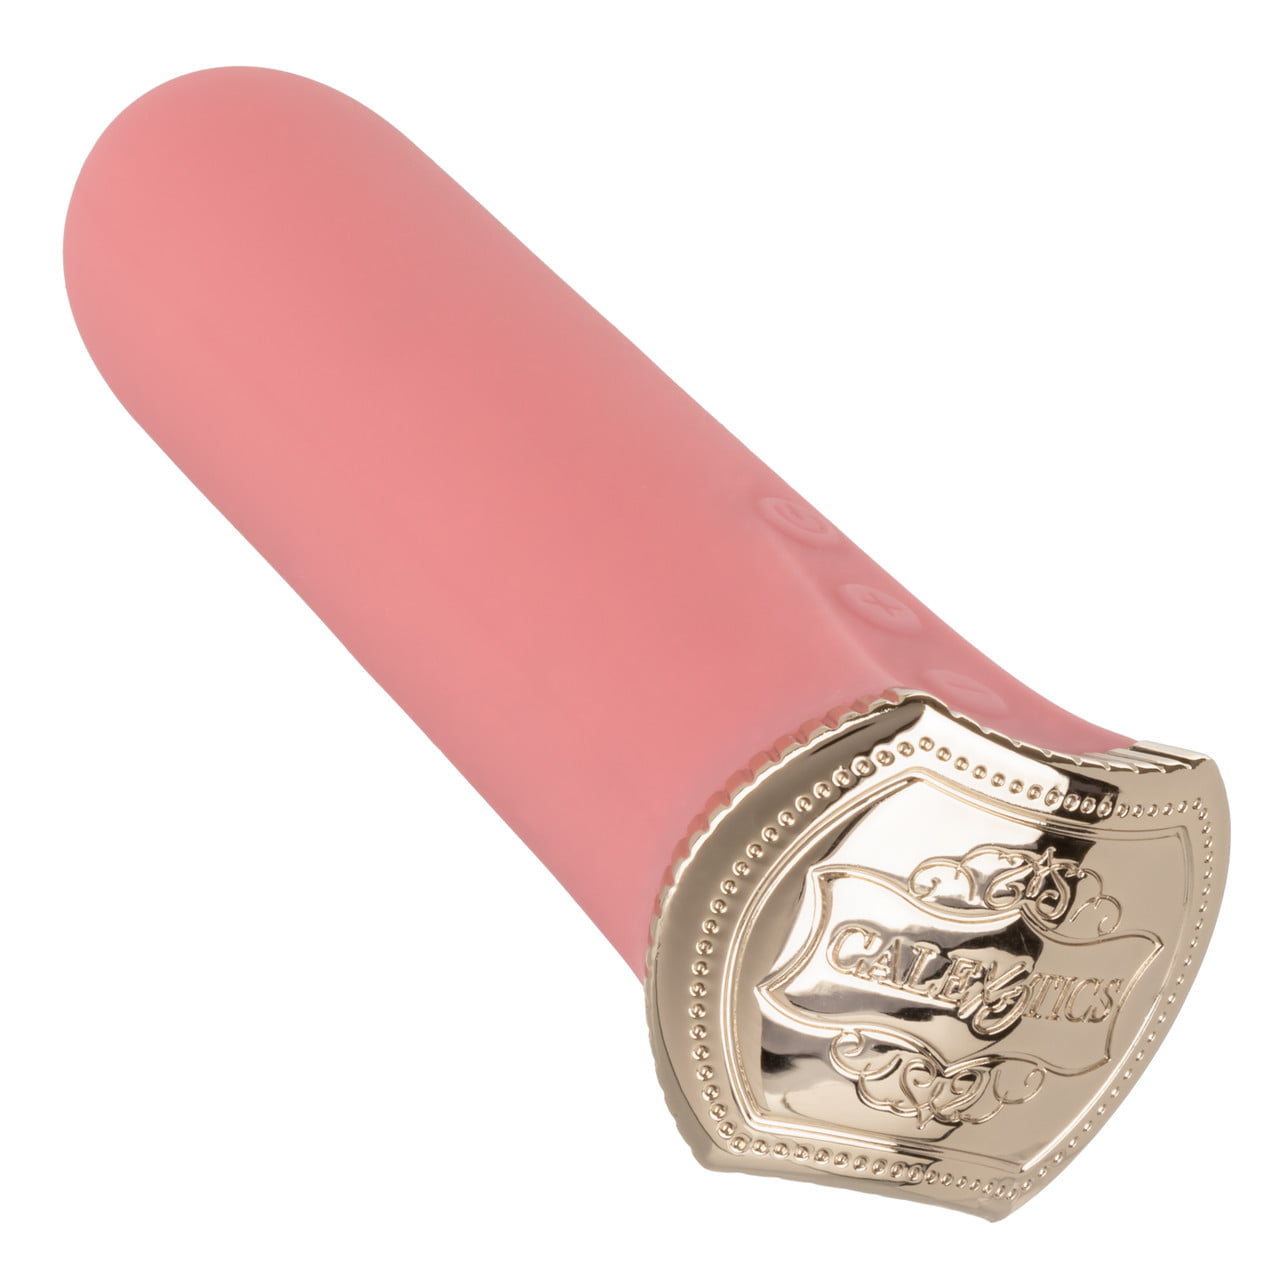 Pleasure product Soft-touch silicone